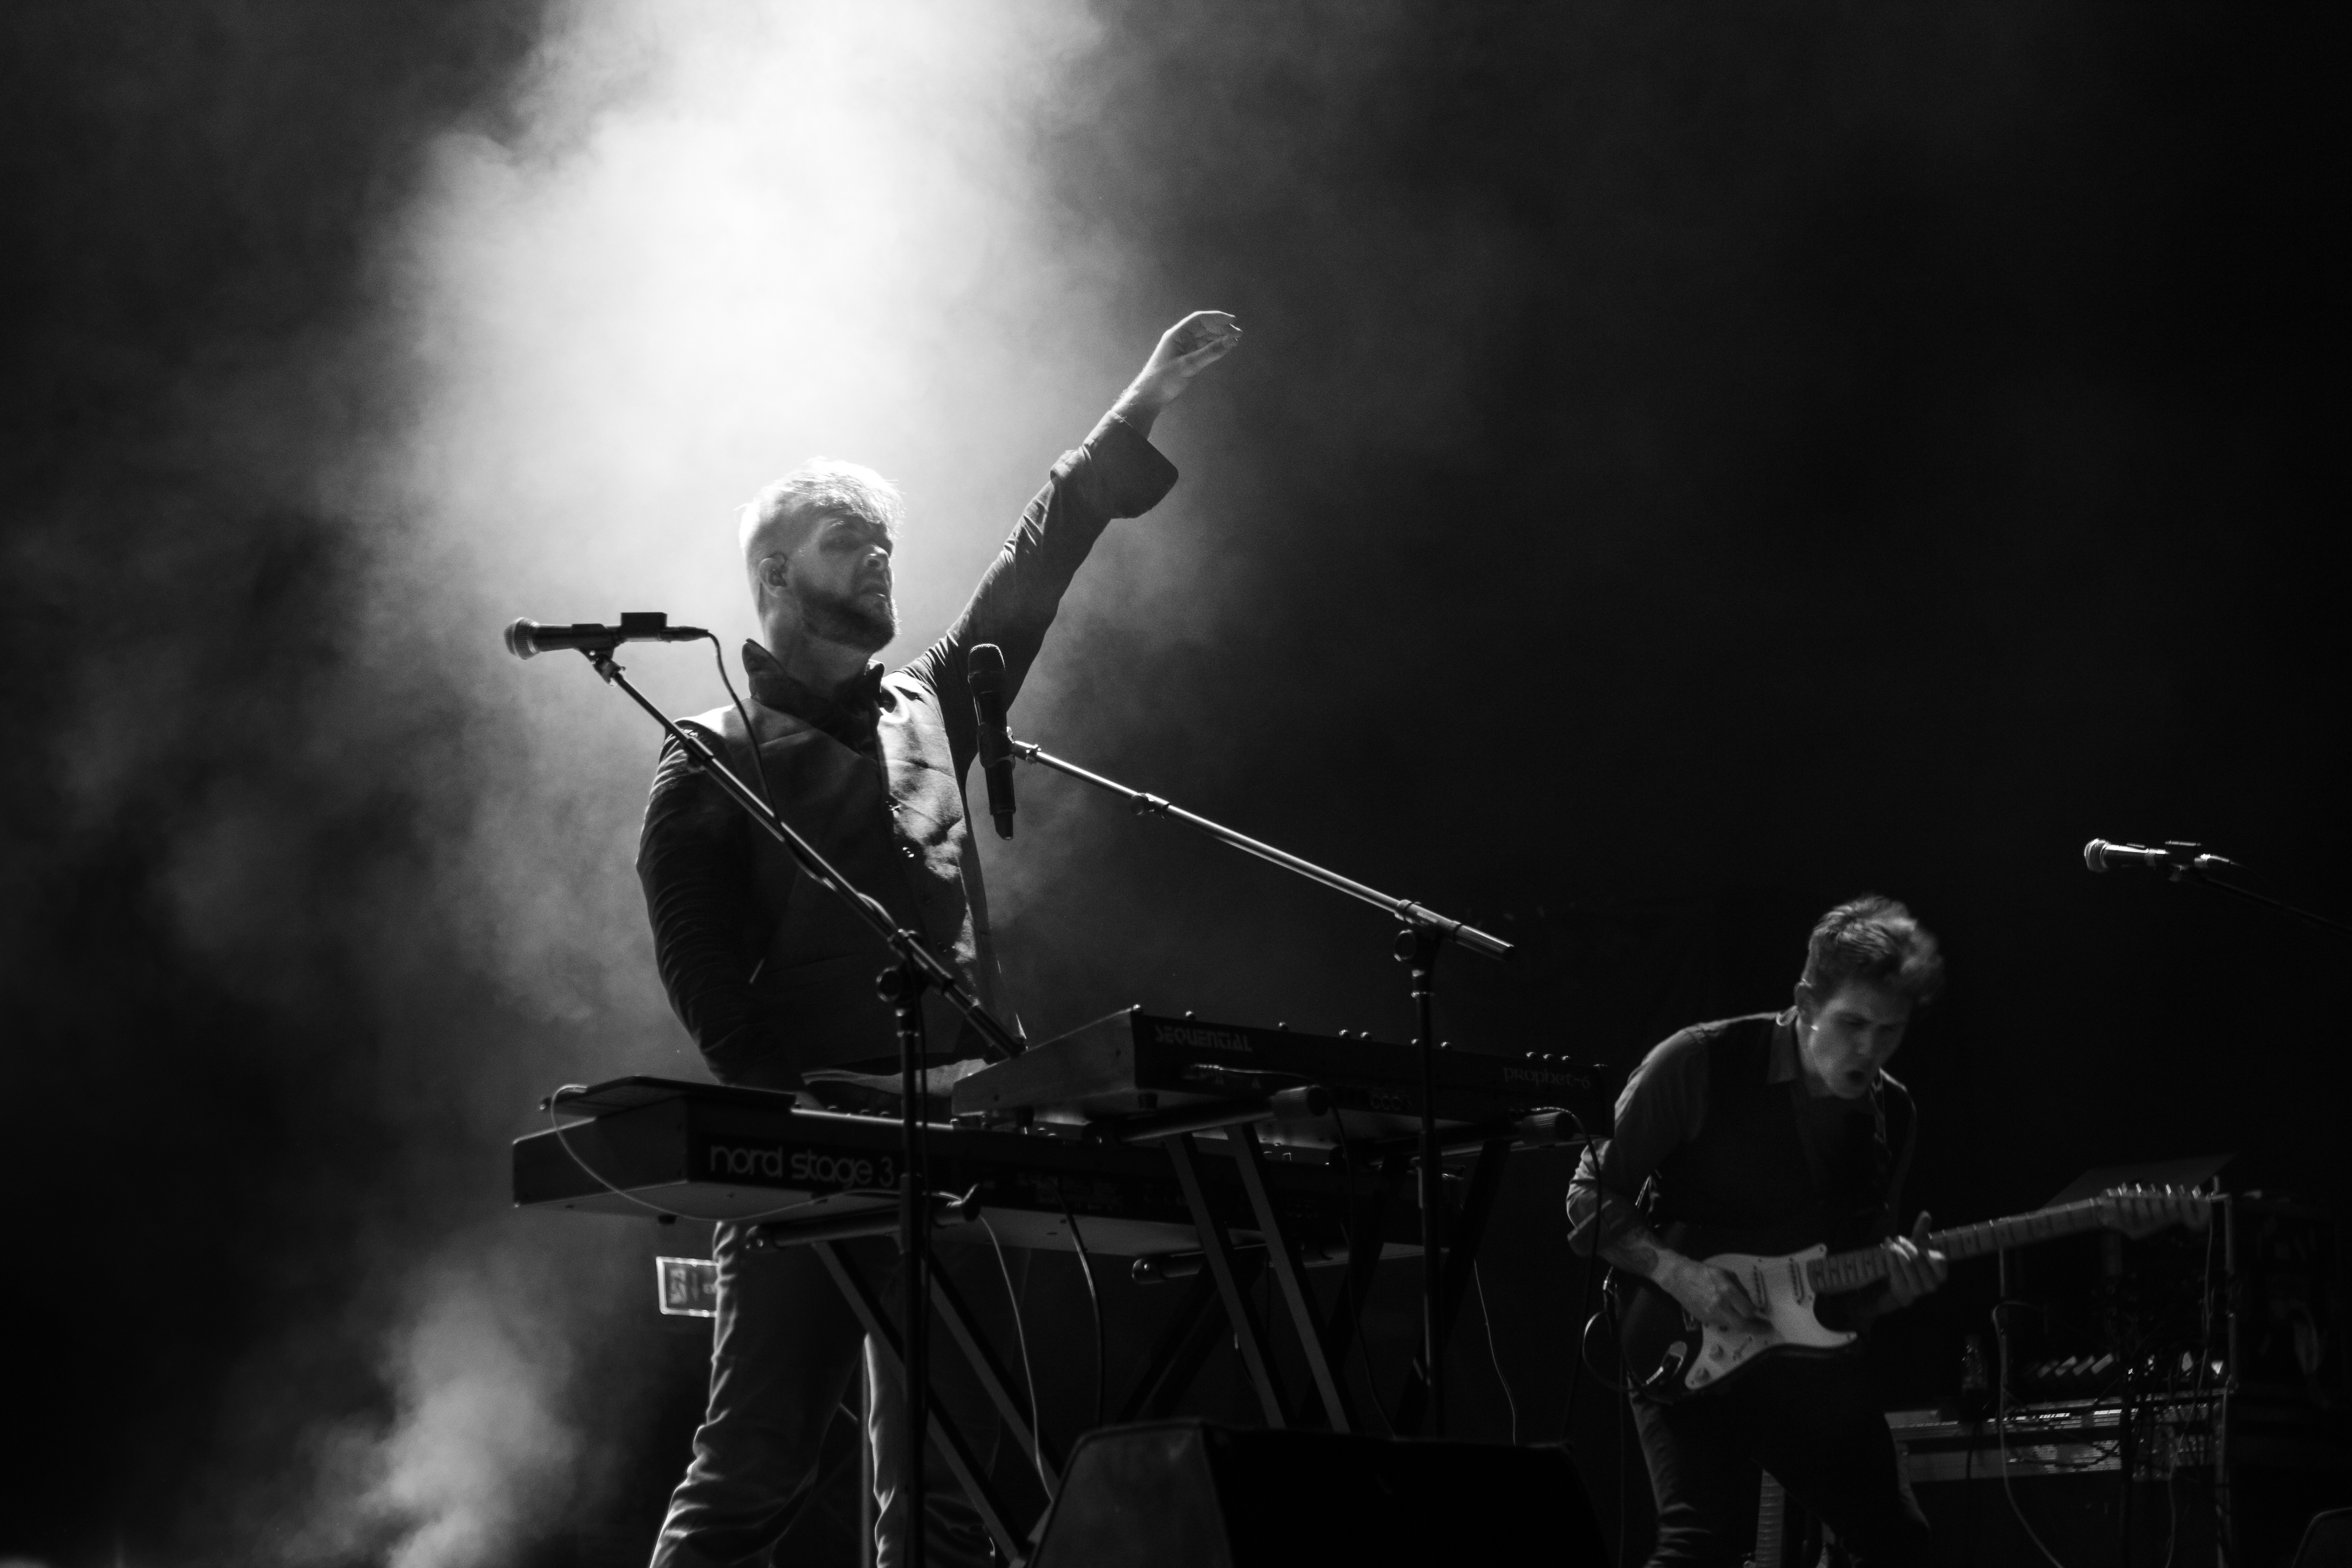 People 5184x3456 Leprous (band) metal music monochrome rock bands music rock music concerts men